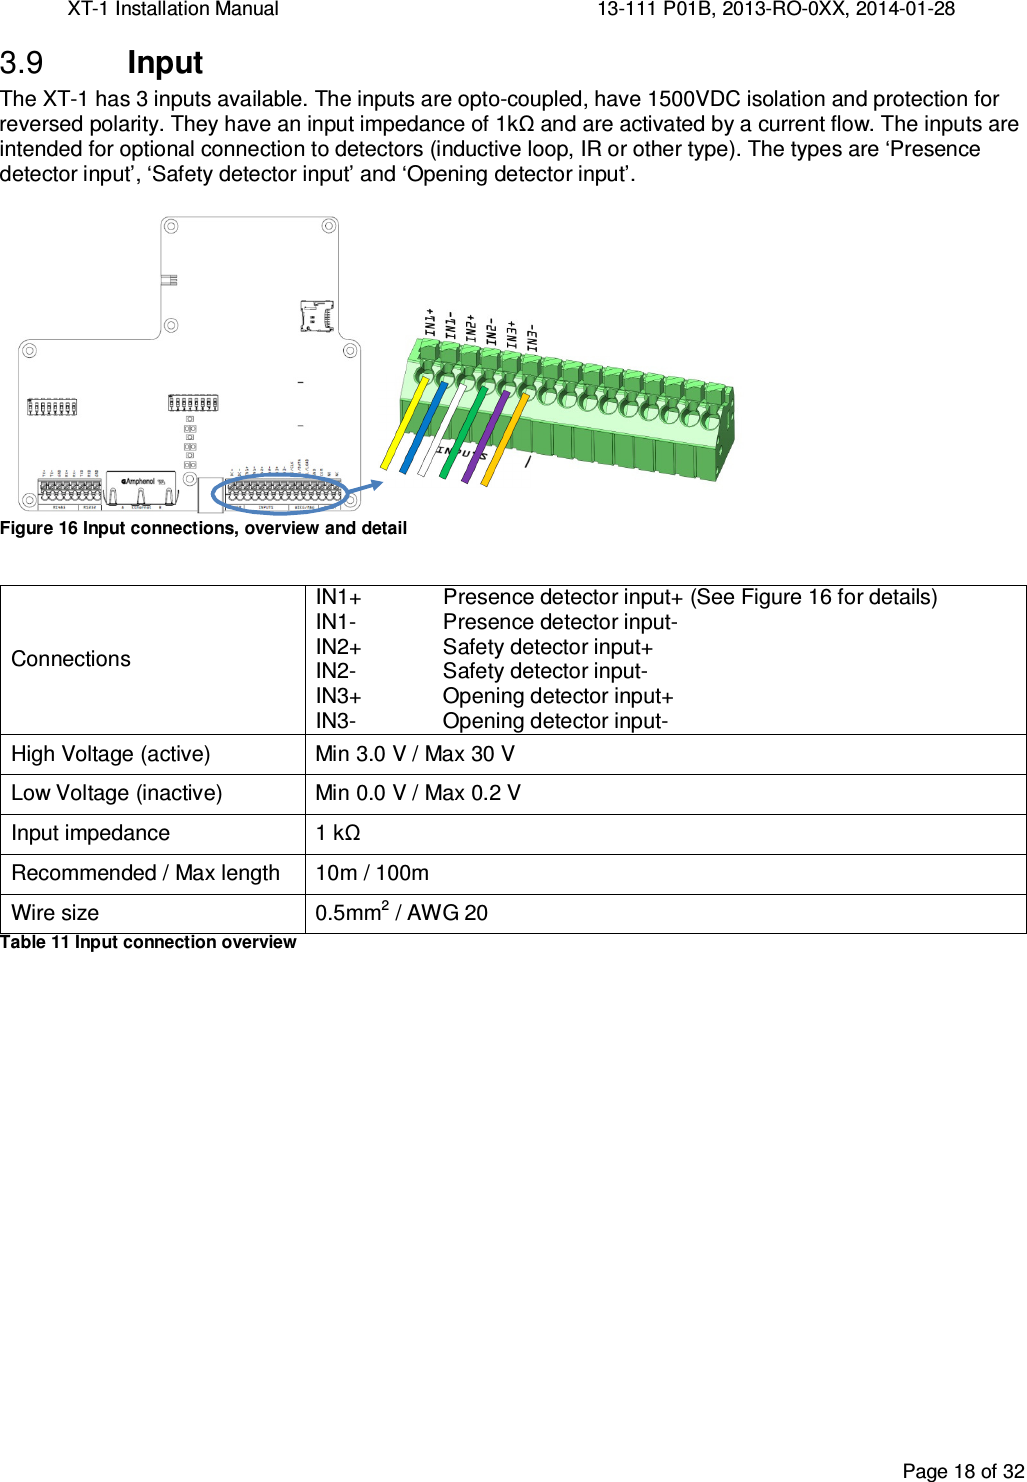 XT-1 Installation Manual     13-111 P01B, 2013-RO-0XX, 2014-01-28  Page 18 of 32   Input 3.9The XT-1 has 3 inputs available. The inputs are opto-coupled, have 1500VDC isolation and protection for reversed polarity. They have an input impedance of 1kΩ and are activated by a current flow. The inputs are intended for optional connection to detectors (inductive loop, IR or other type). The types are ‘Presence detector input’, ‘Safety detector input’ and ‘Opening detector input’.  Figure 16 Input connections, overview and detail  Connections IN1+ Presence detector input+ (See Figure 16 for details) IN1-  Presence detector input- IN2+  Safety detector input+ IN2-  Safety detector input- IN3+  Opening detector input+ IN3-  Opening detector input- High Voltage (active)  Min 3.0 V / Max 30 V Low Voltage (inactive)  Min 0.0 V / Max 0.2 V Input impedance  1 kΩ Recommended / Max length  10m / 100m Wire size  0.5mm2 / AWG 20 Table 11 Input connection overview    